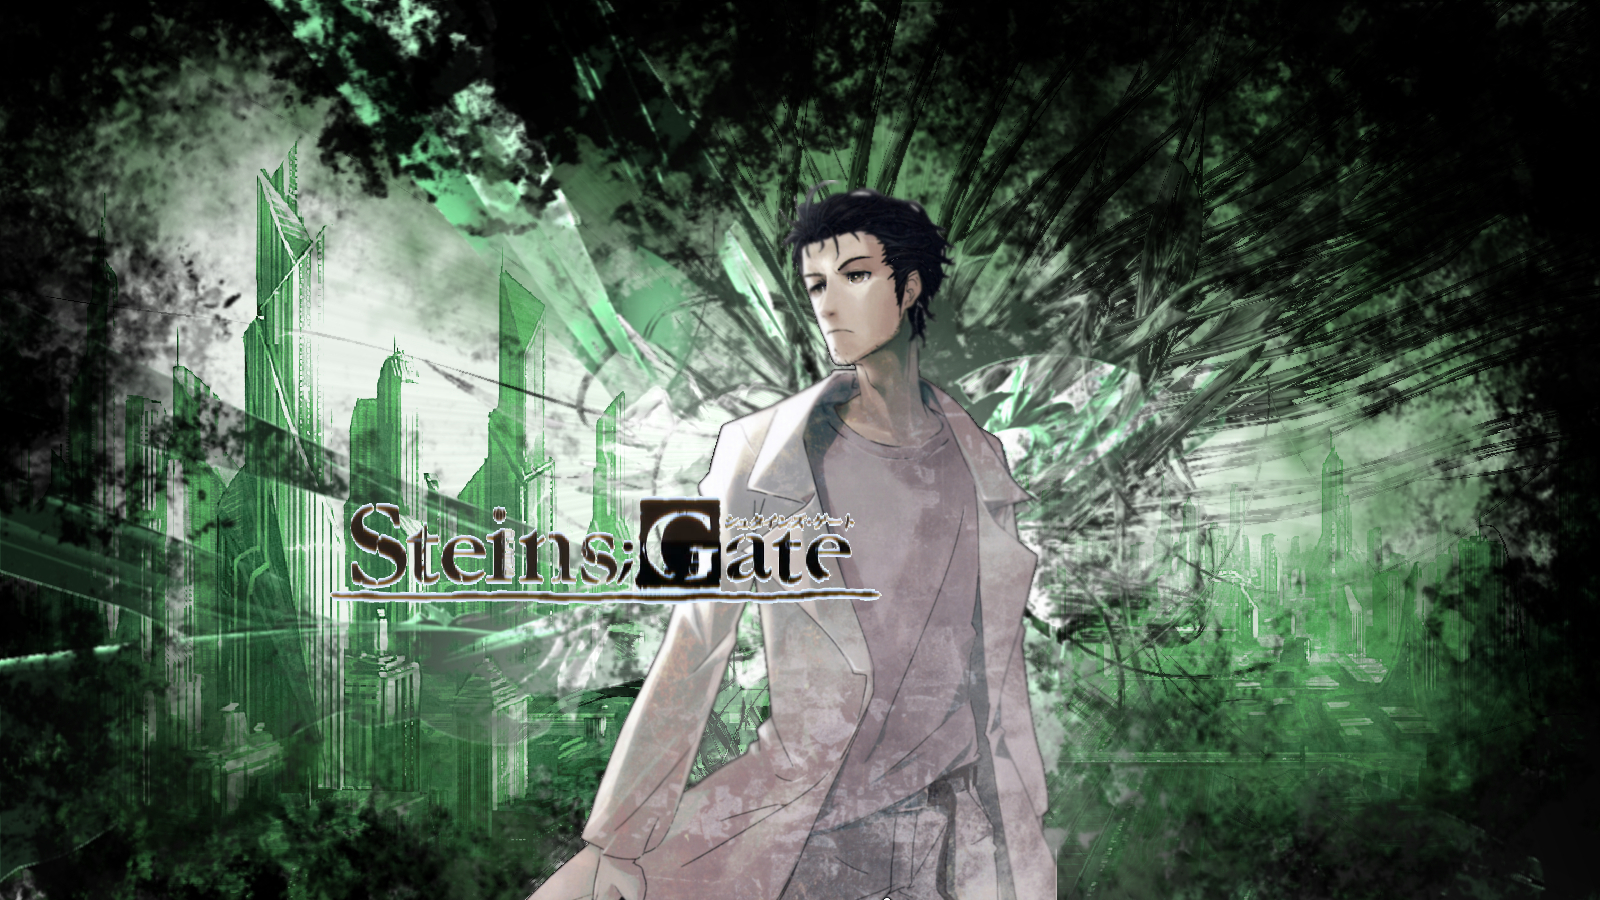 Free Download Steins Gate Wallpaper By Kechpup 1600x900 For Your Desktop Mobile Tablet Explore 50 Steins Gate Wallpaper Steins Gate Wallpaper 1080p Steins Gate Wallpaper Hd Gate Anime Wallpaper